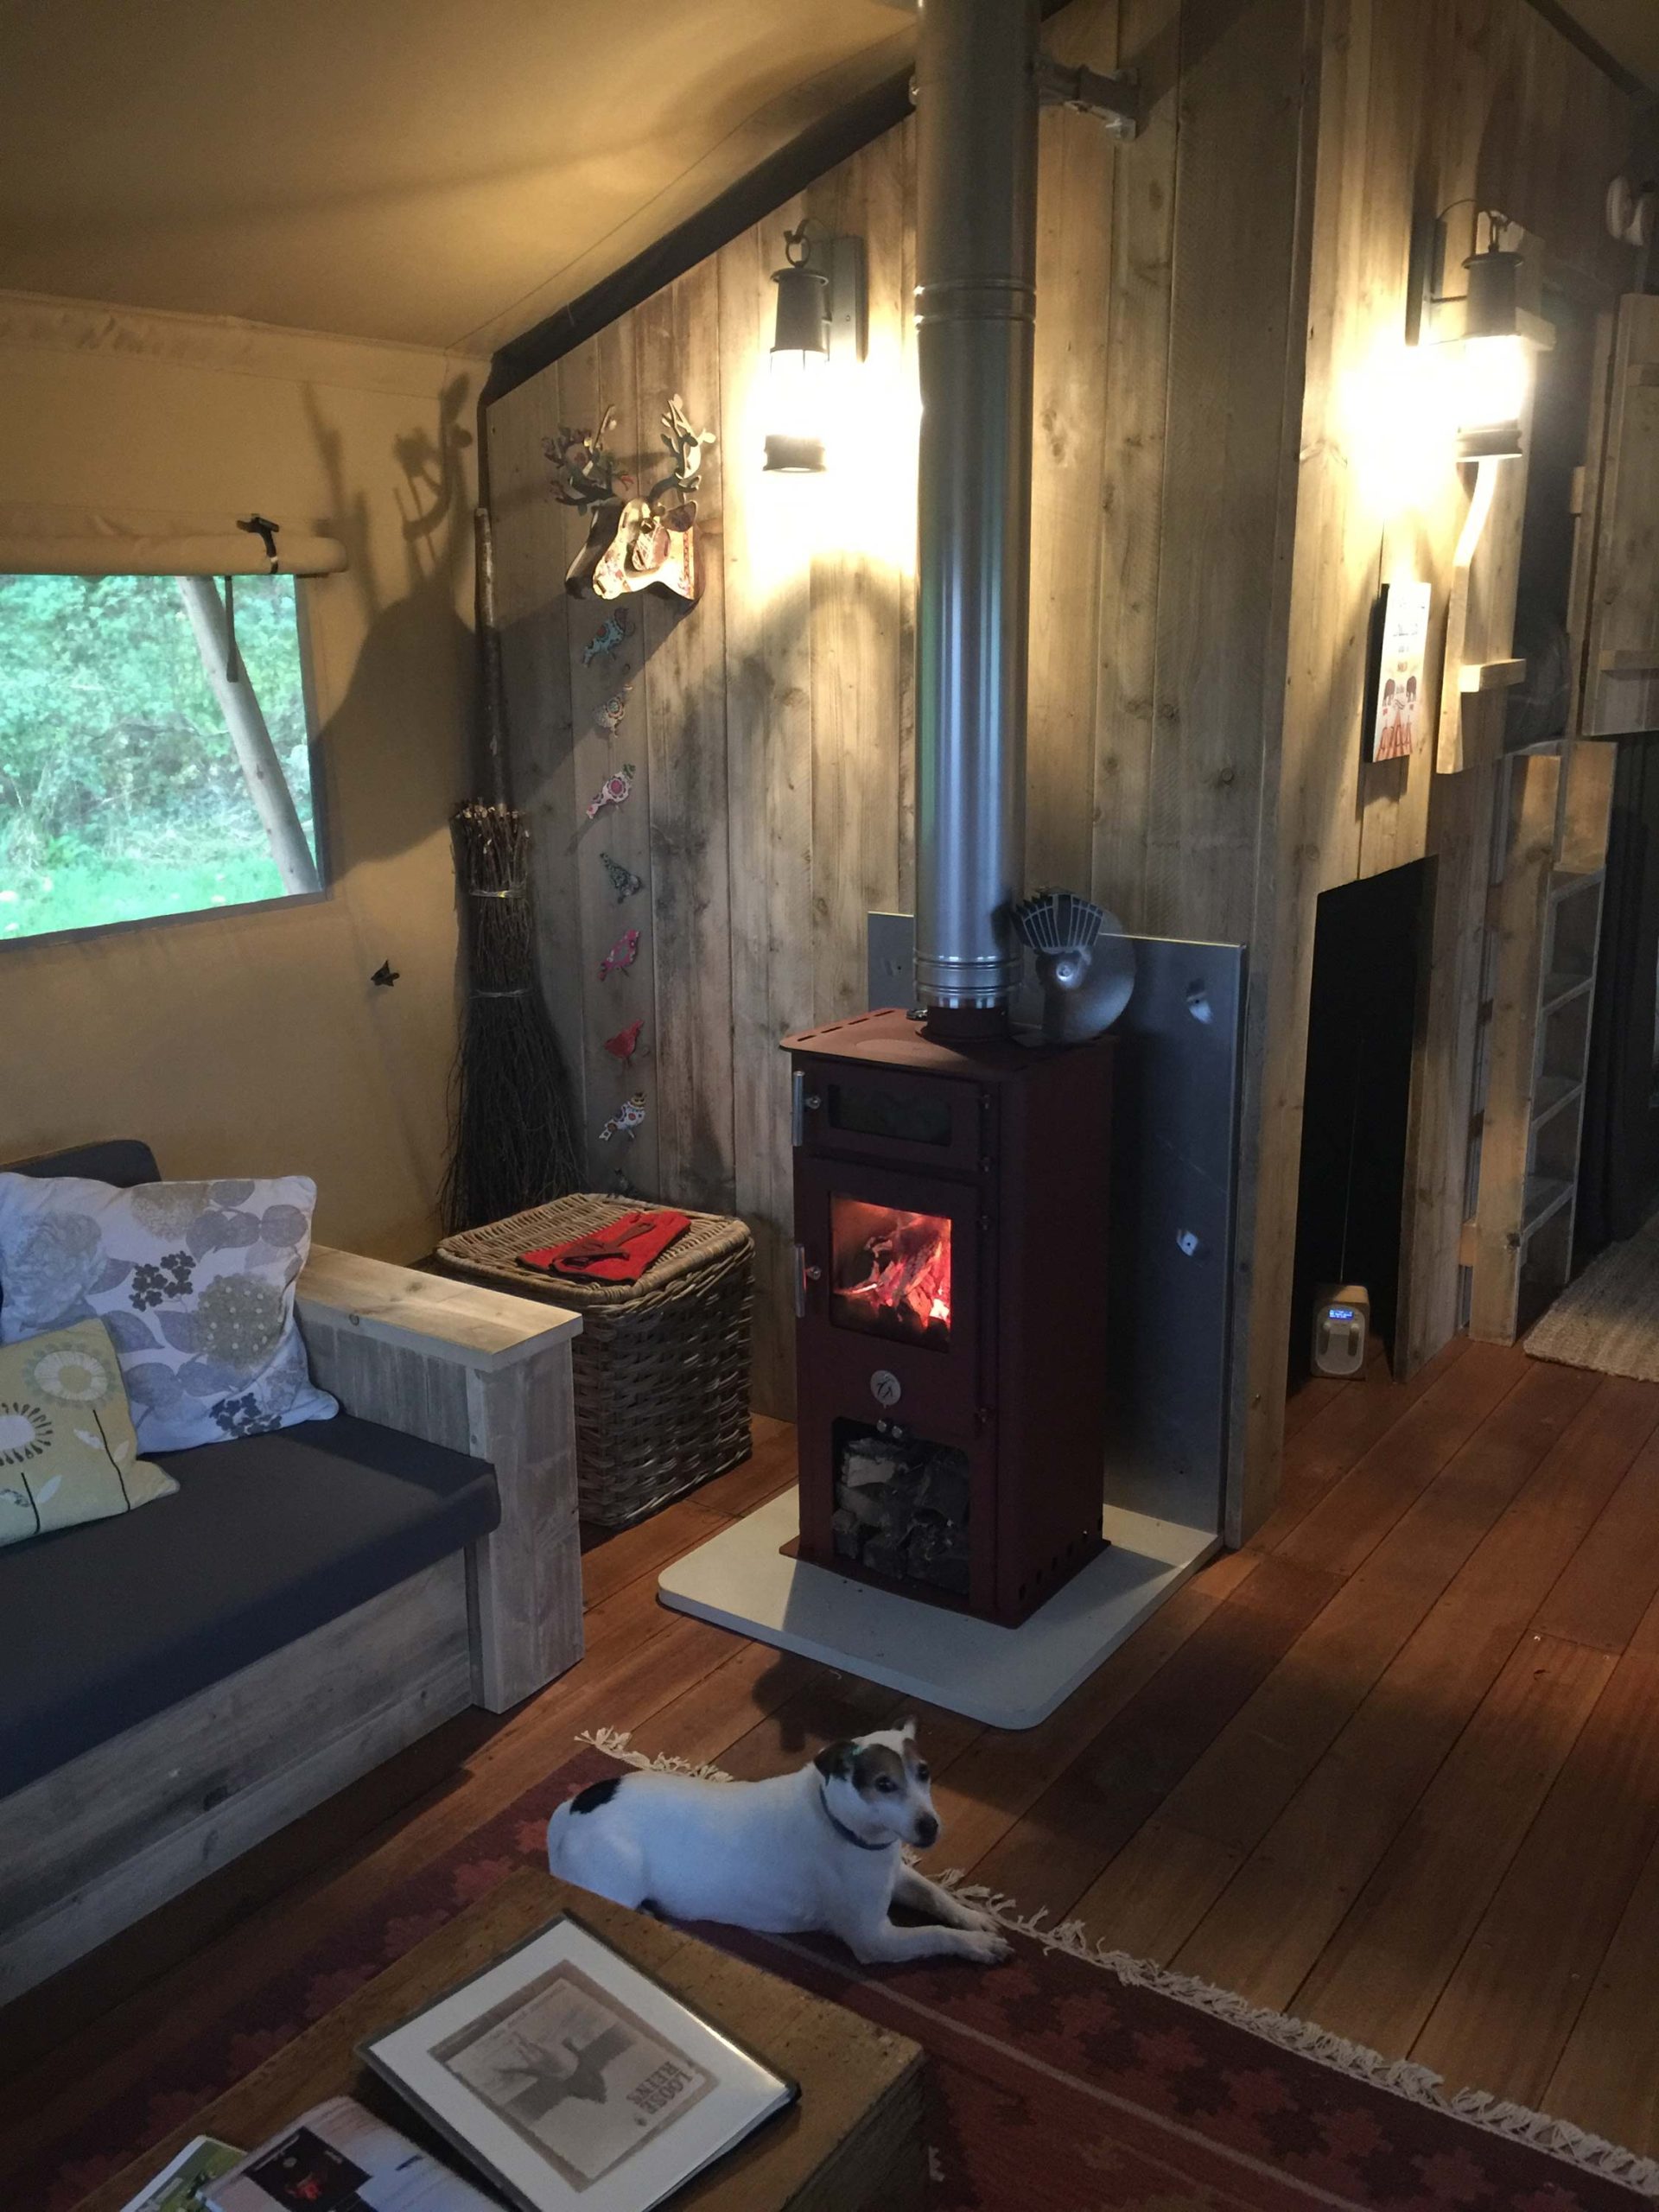 A dog curled up in front of the wood-burner in the lounge area inside one of Loose Reins' lodges